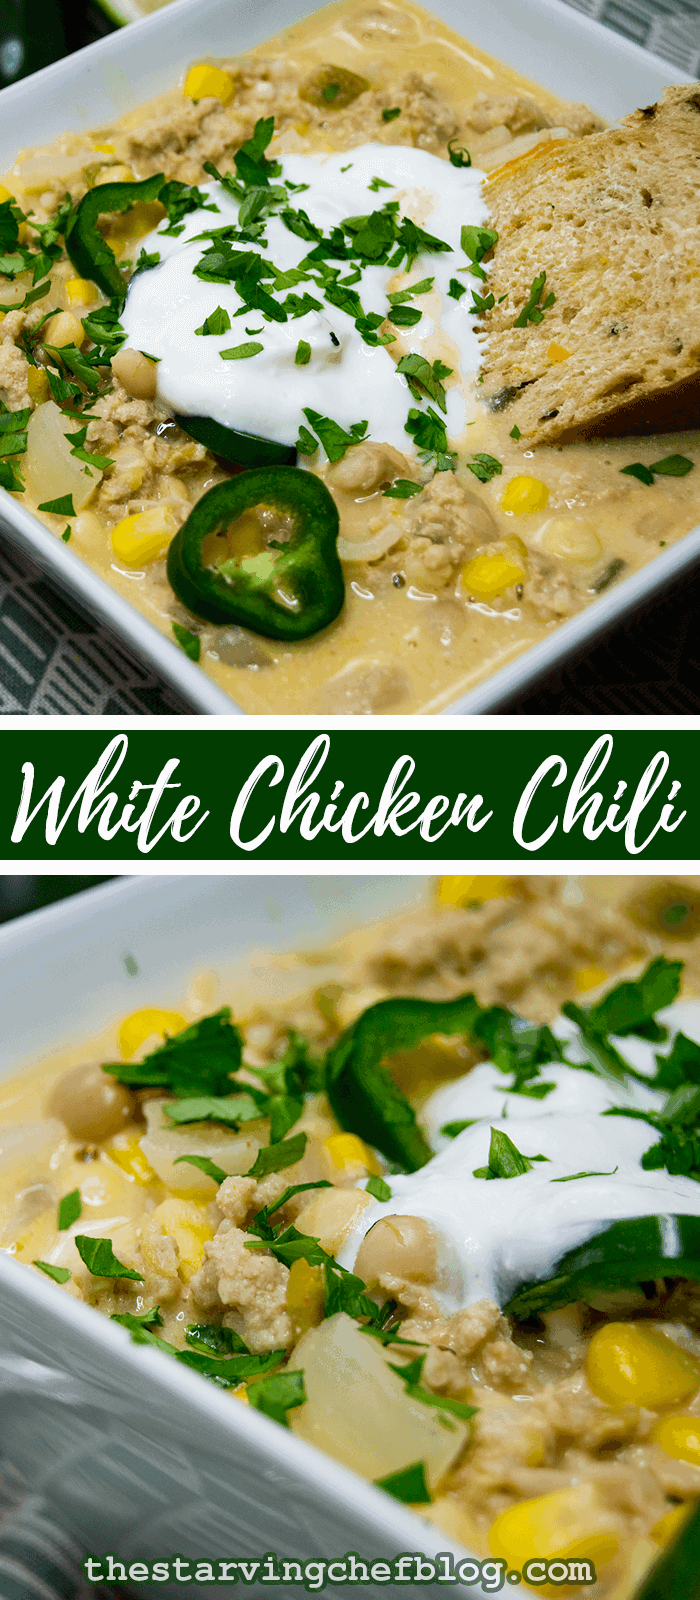 White Chicken Chili - Once Upon a Chef